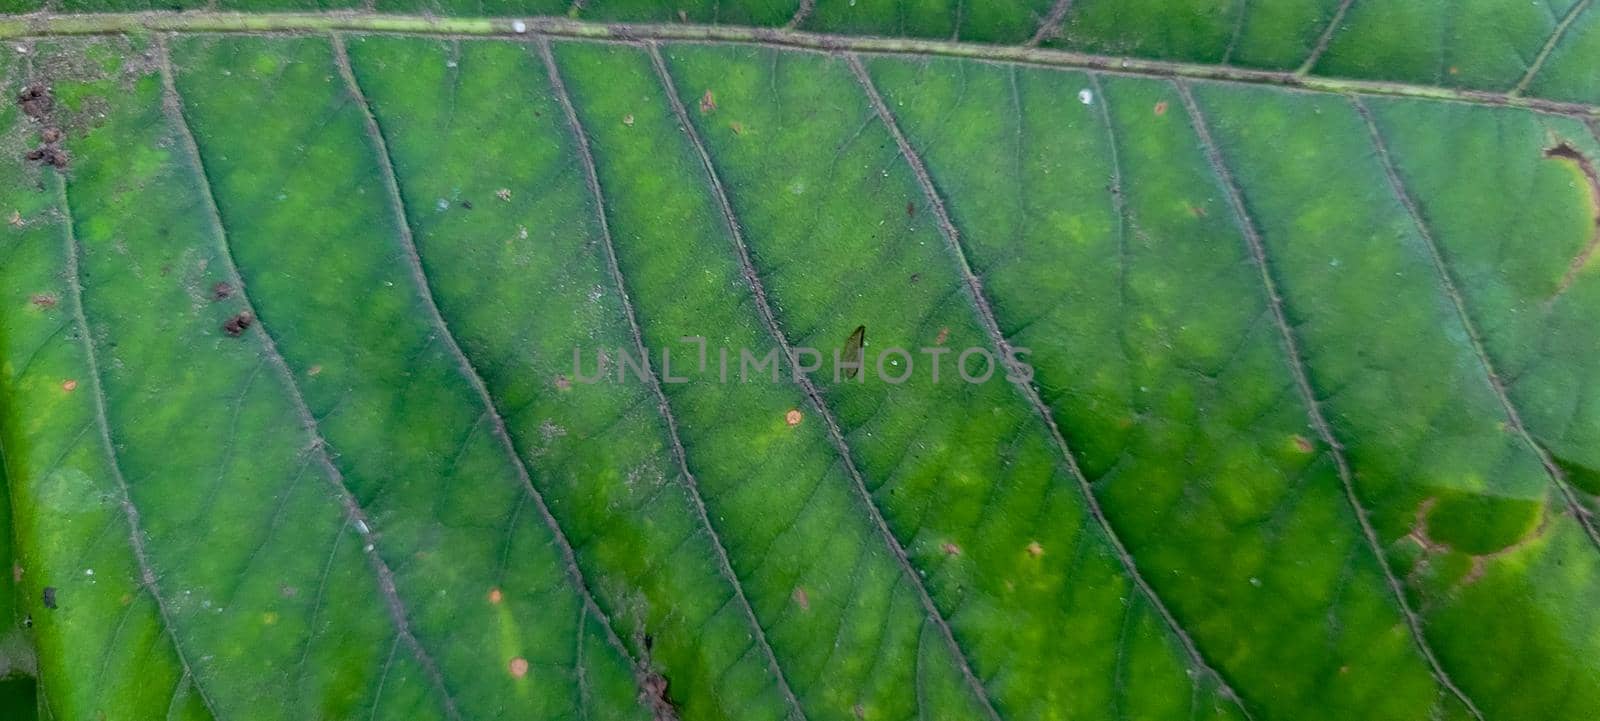 abstract tropical green leaf with texture, which can be used as background